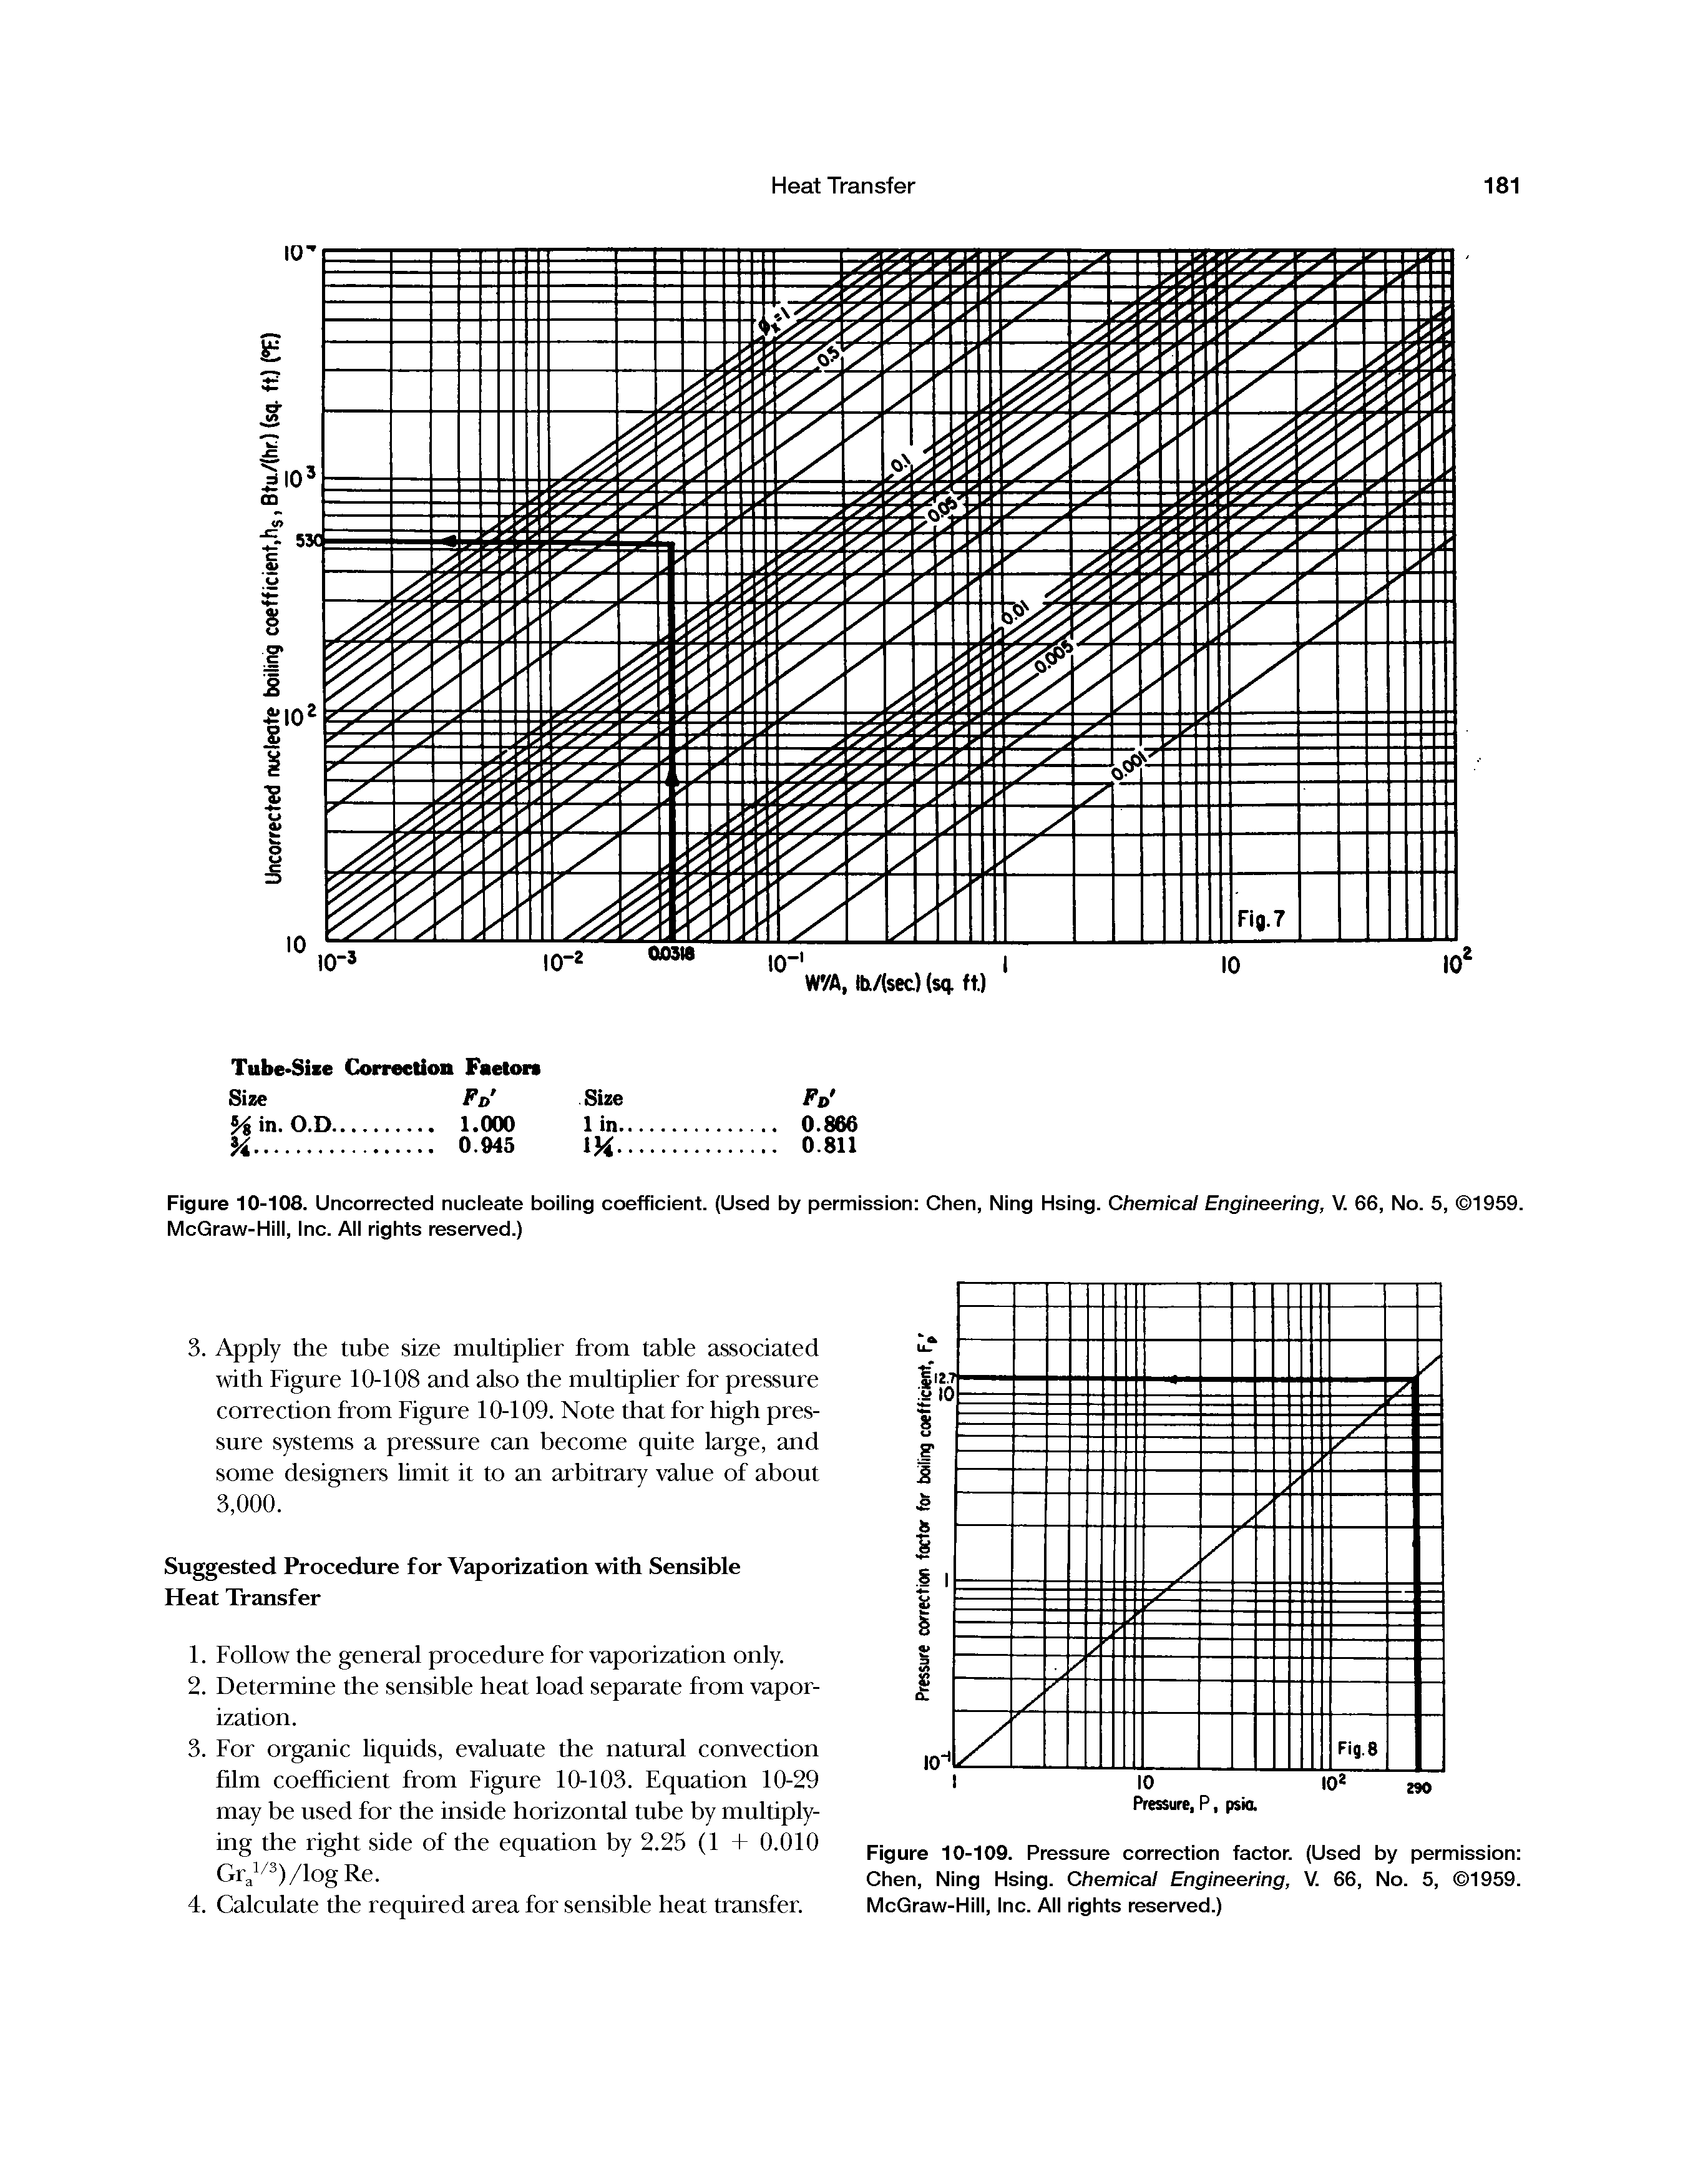 Figure 10-108. Uncorrected nucleate boiling coefficient. (Used by permission Chen, Ning Hsing. Chemical Engineering, V. 66, No. 5, 1959. McGraw-Hill, Inc. All rights reserved.)...